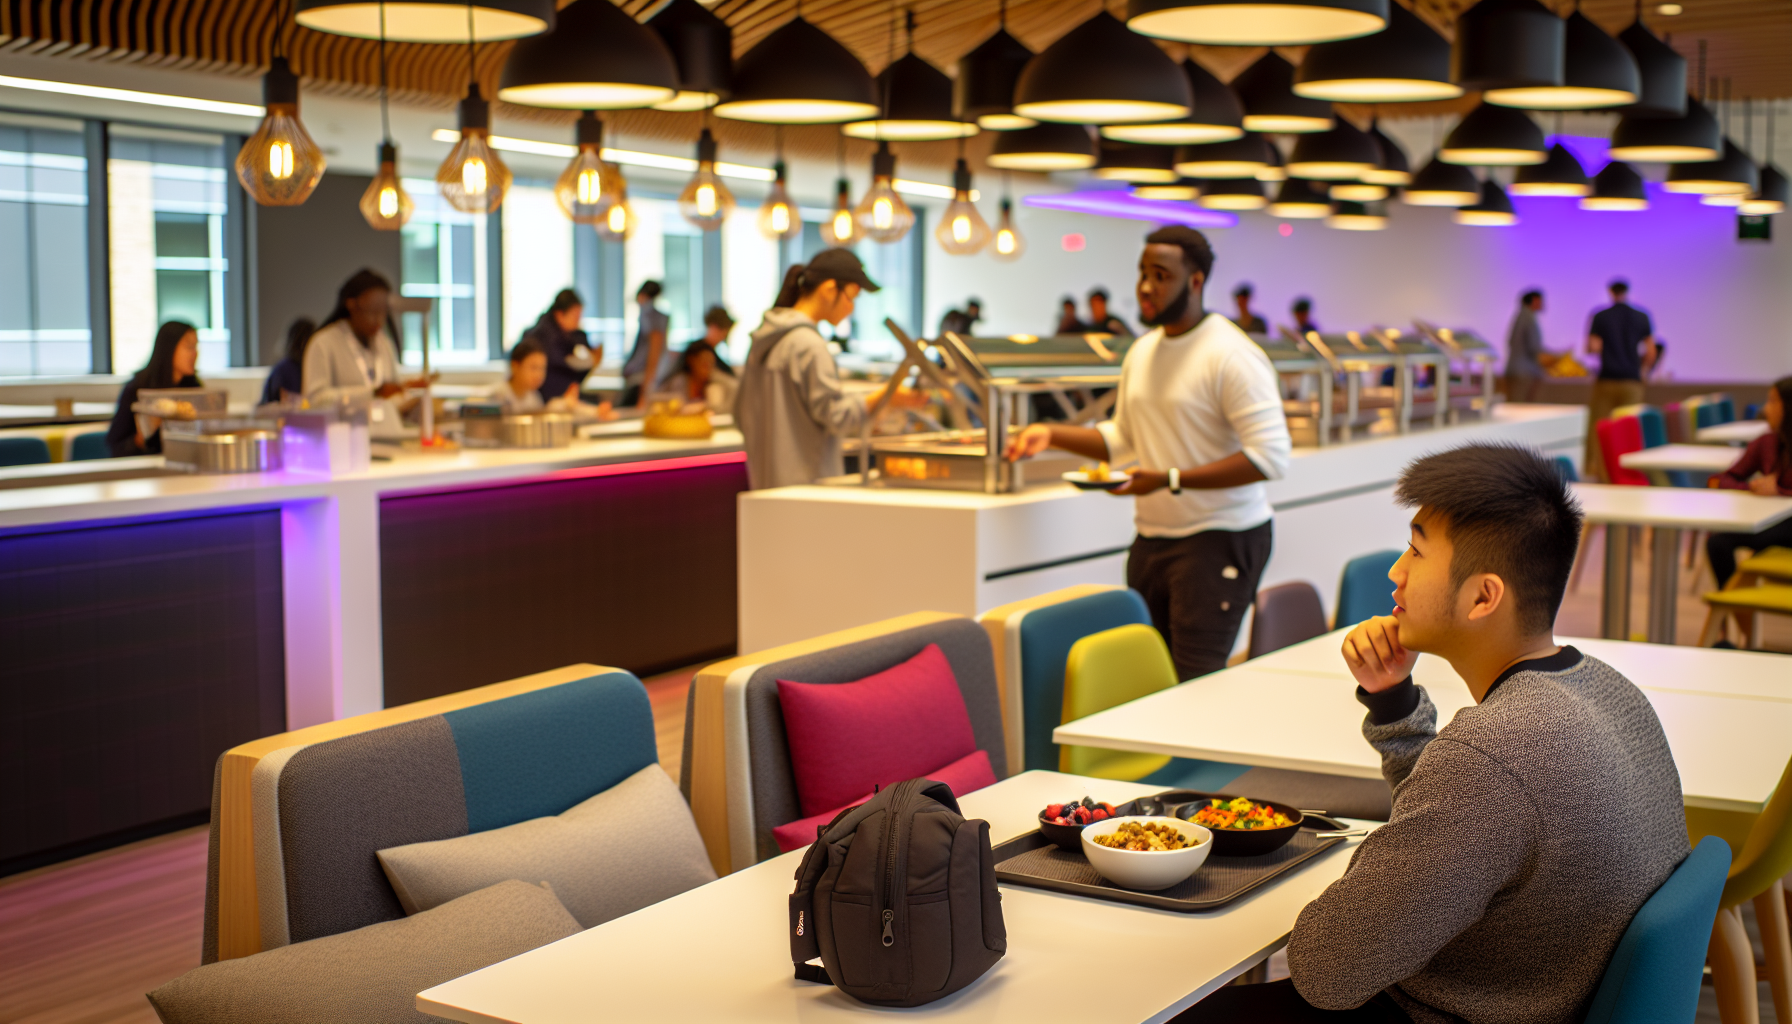 Photo of innovative higher education dining spaces transformation